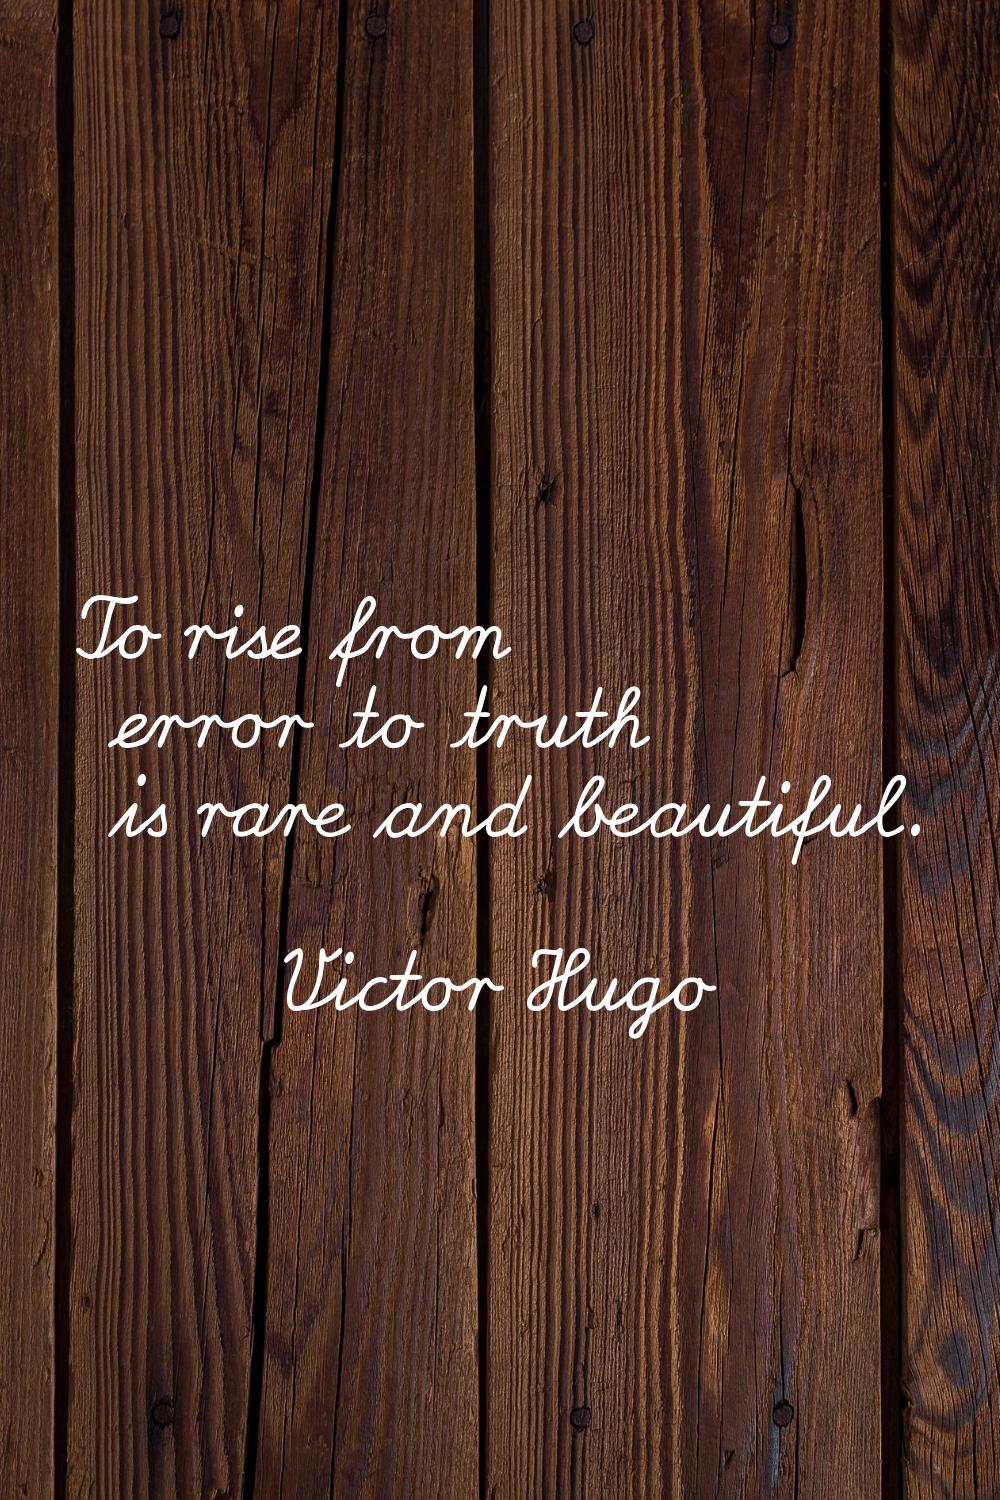 To rise from error to truth is rare and beautiful.